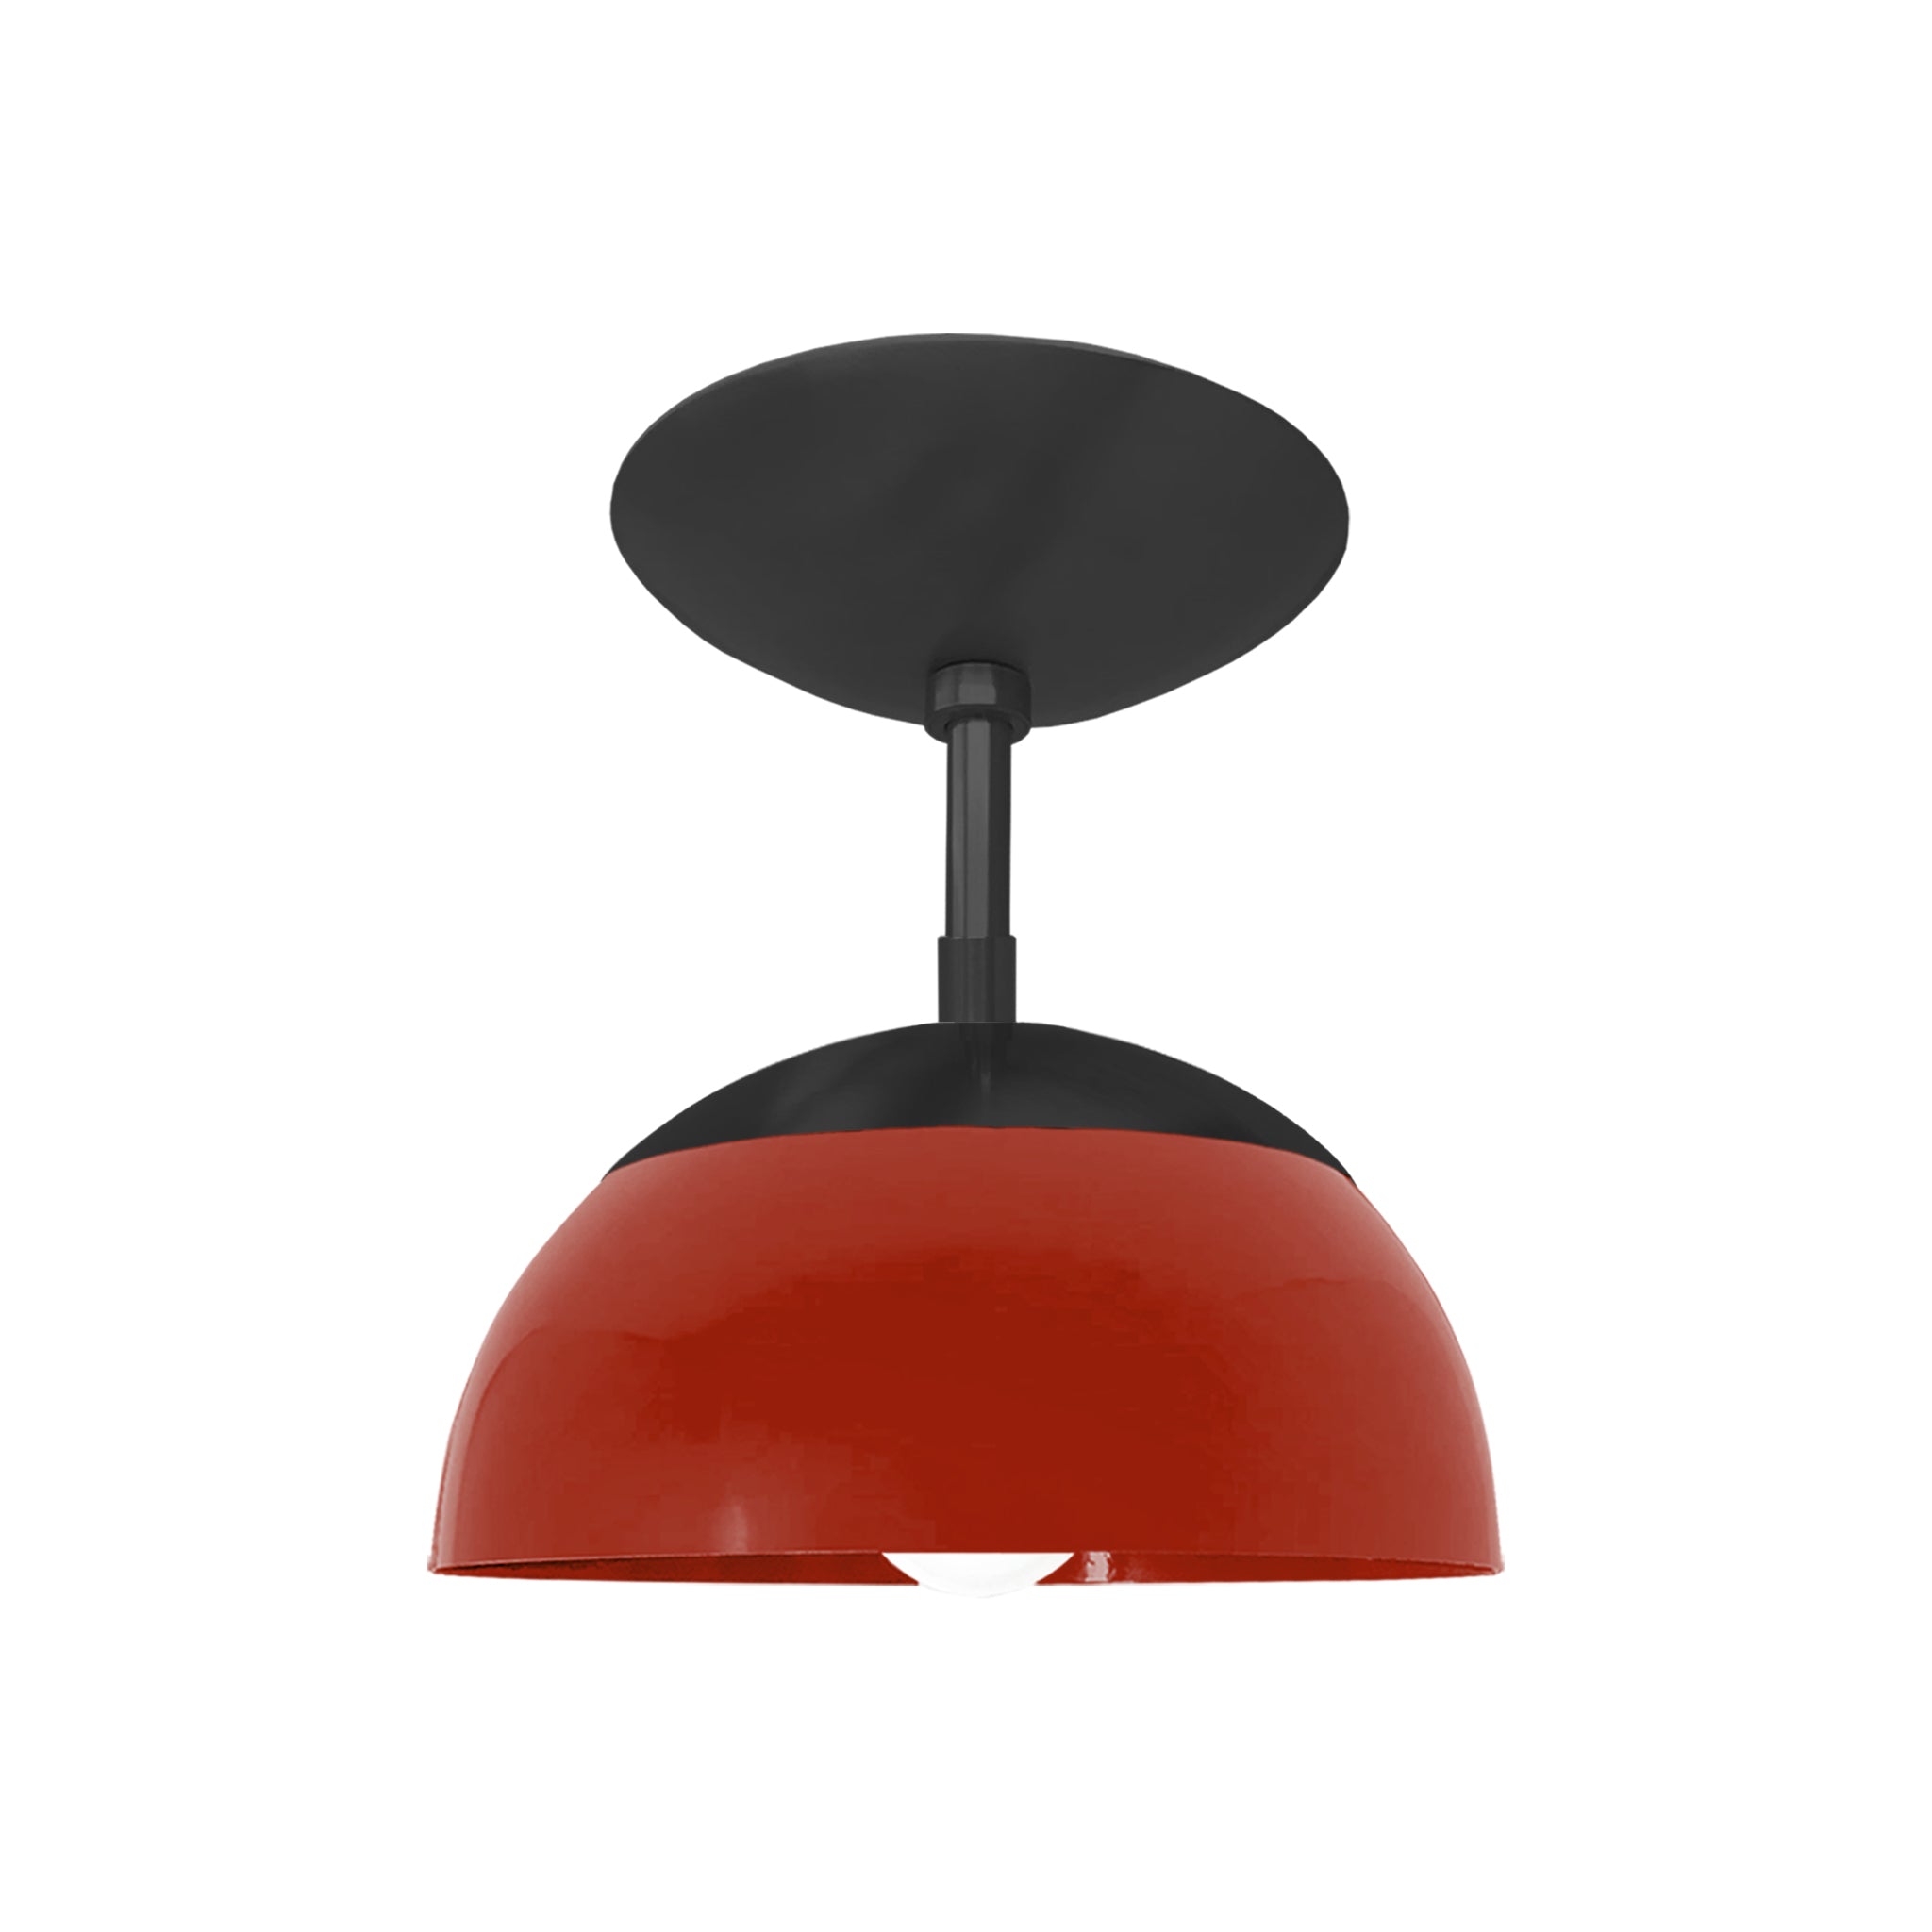 Black and riding hood red color Cadbury flush mount 8" Dutton Brown lighting